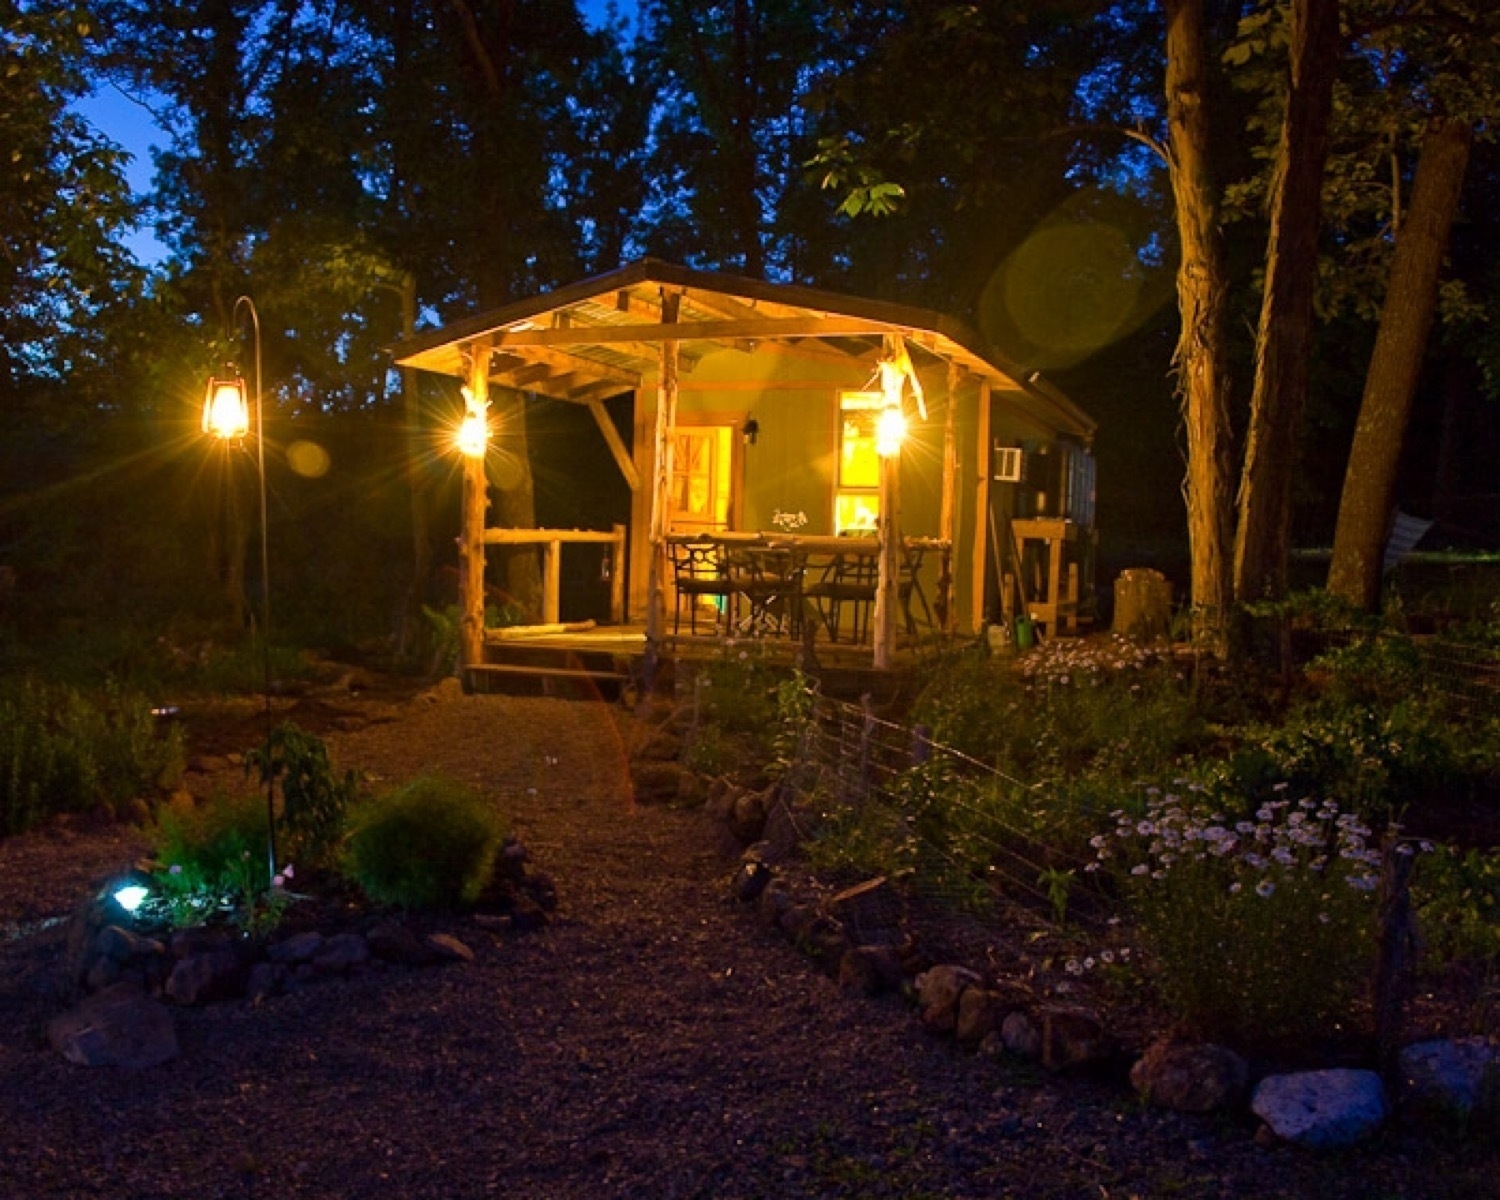 A tiny house in the woods in the evening. Several lanterns light the porch and a flower garden in front of the cabin.